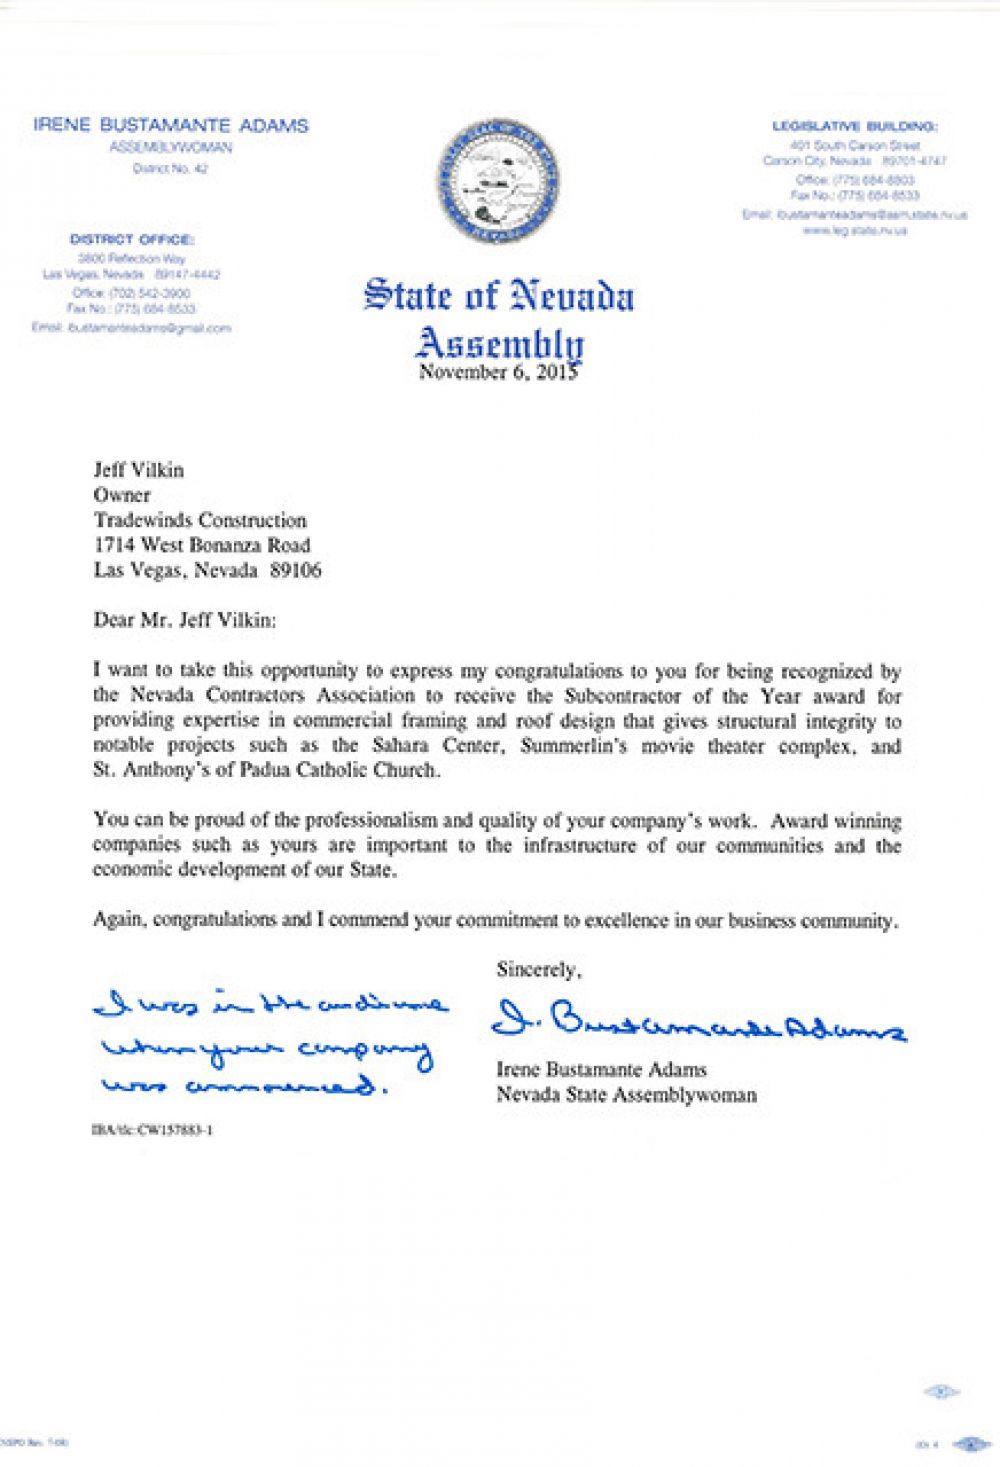 State of Nevada Assemblywoman Letter